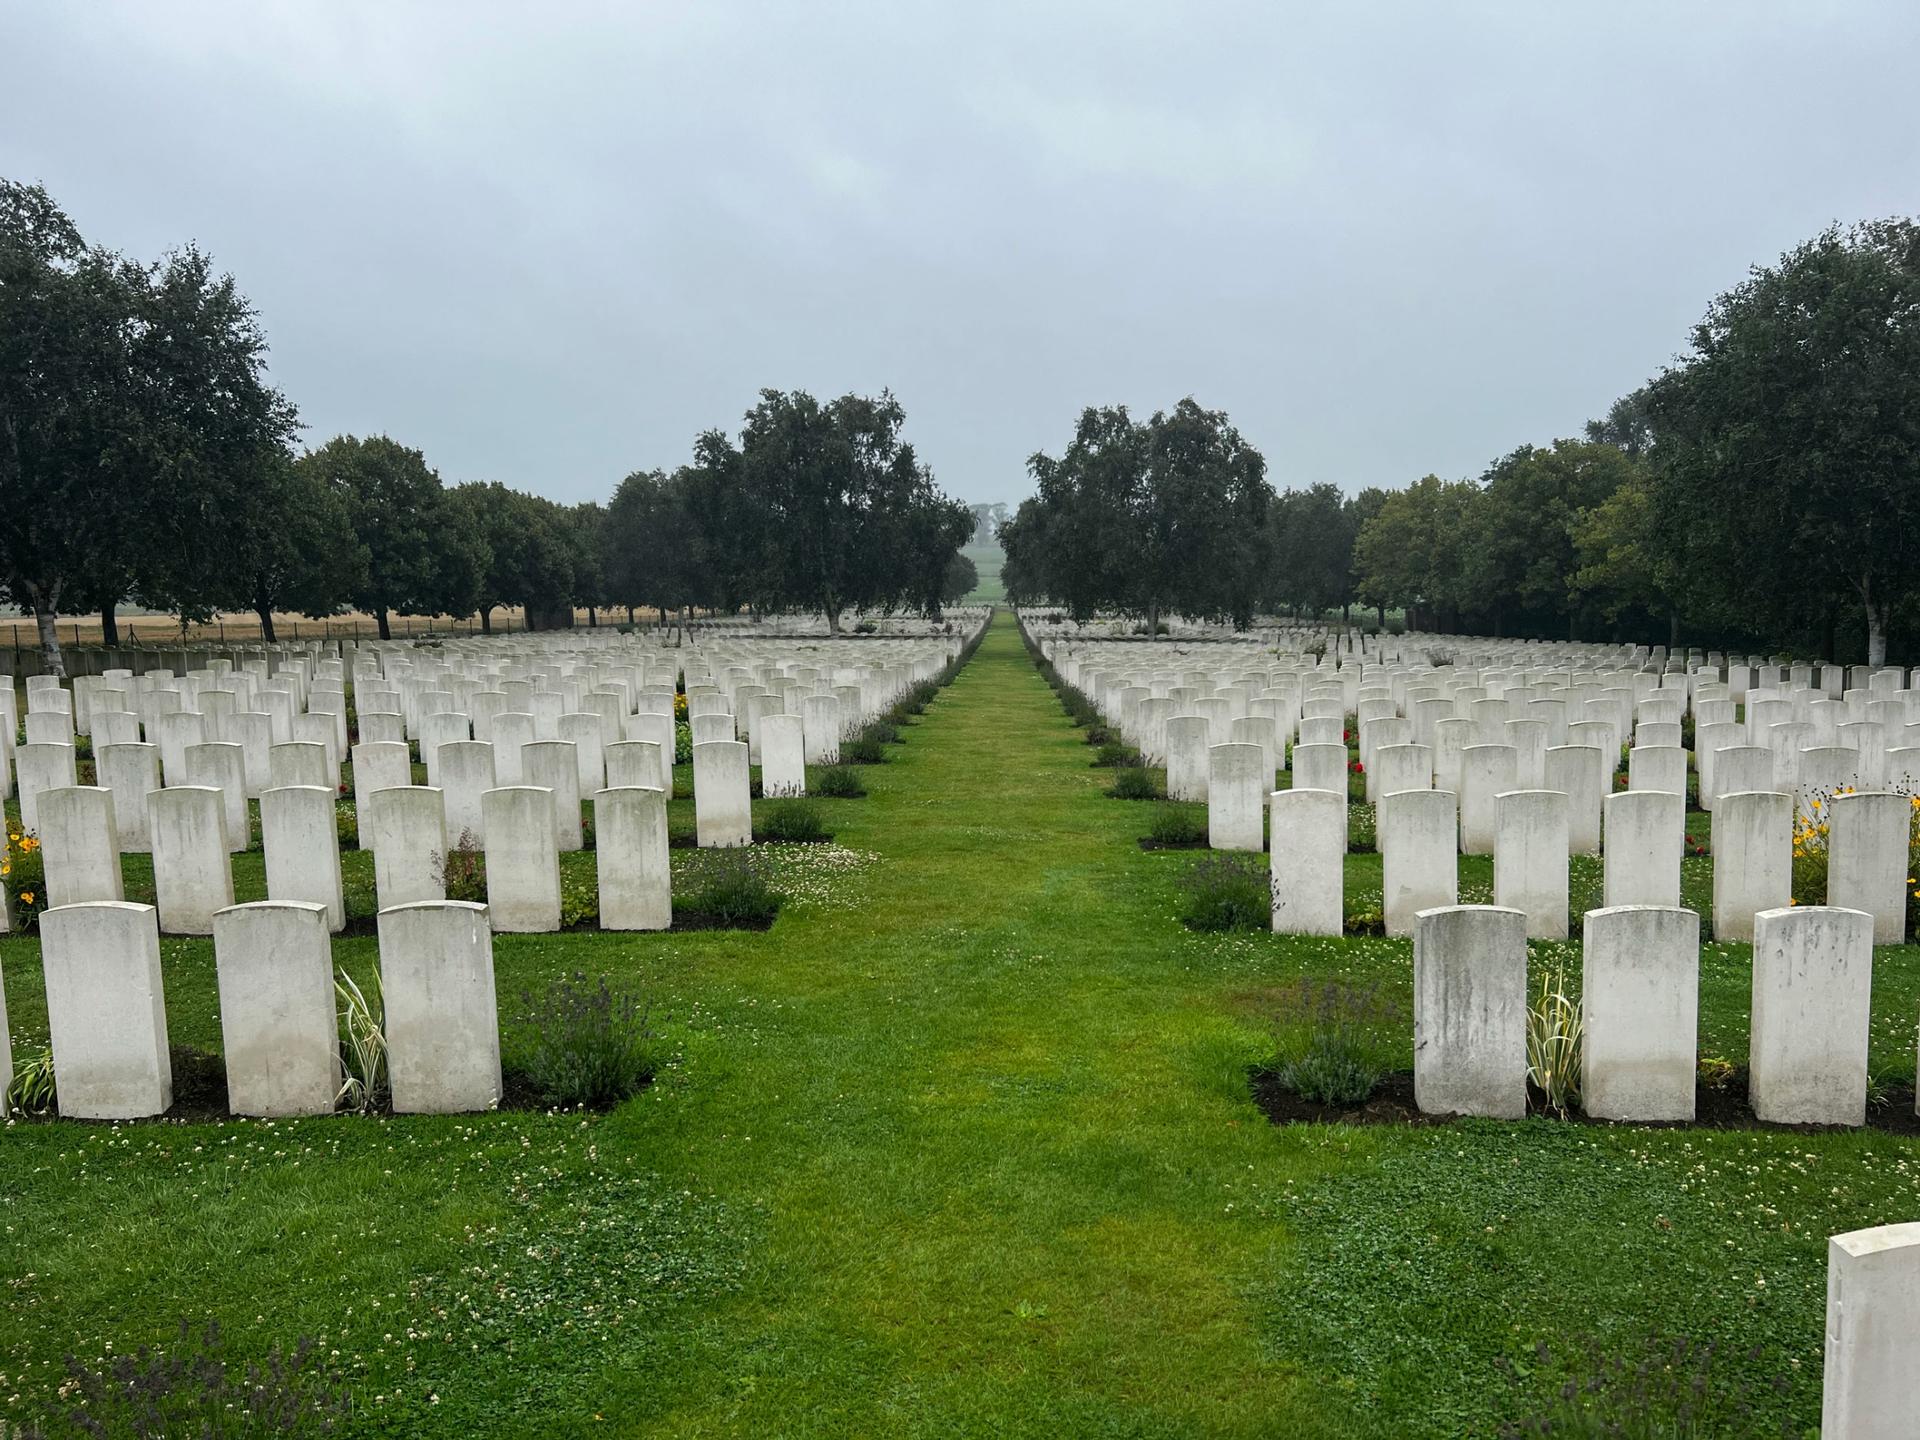 A British cemetery in Hooge, Belgium just east of Ieper. Casualties along the Ieper front line known as the Salient were in the hundreds of thousands. The Third Battle of Ypres in 1917 alone saw 900,000 dead and wounded. 